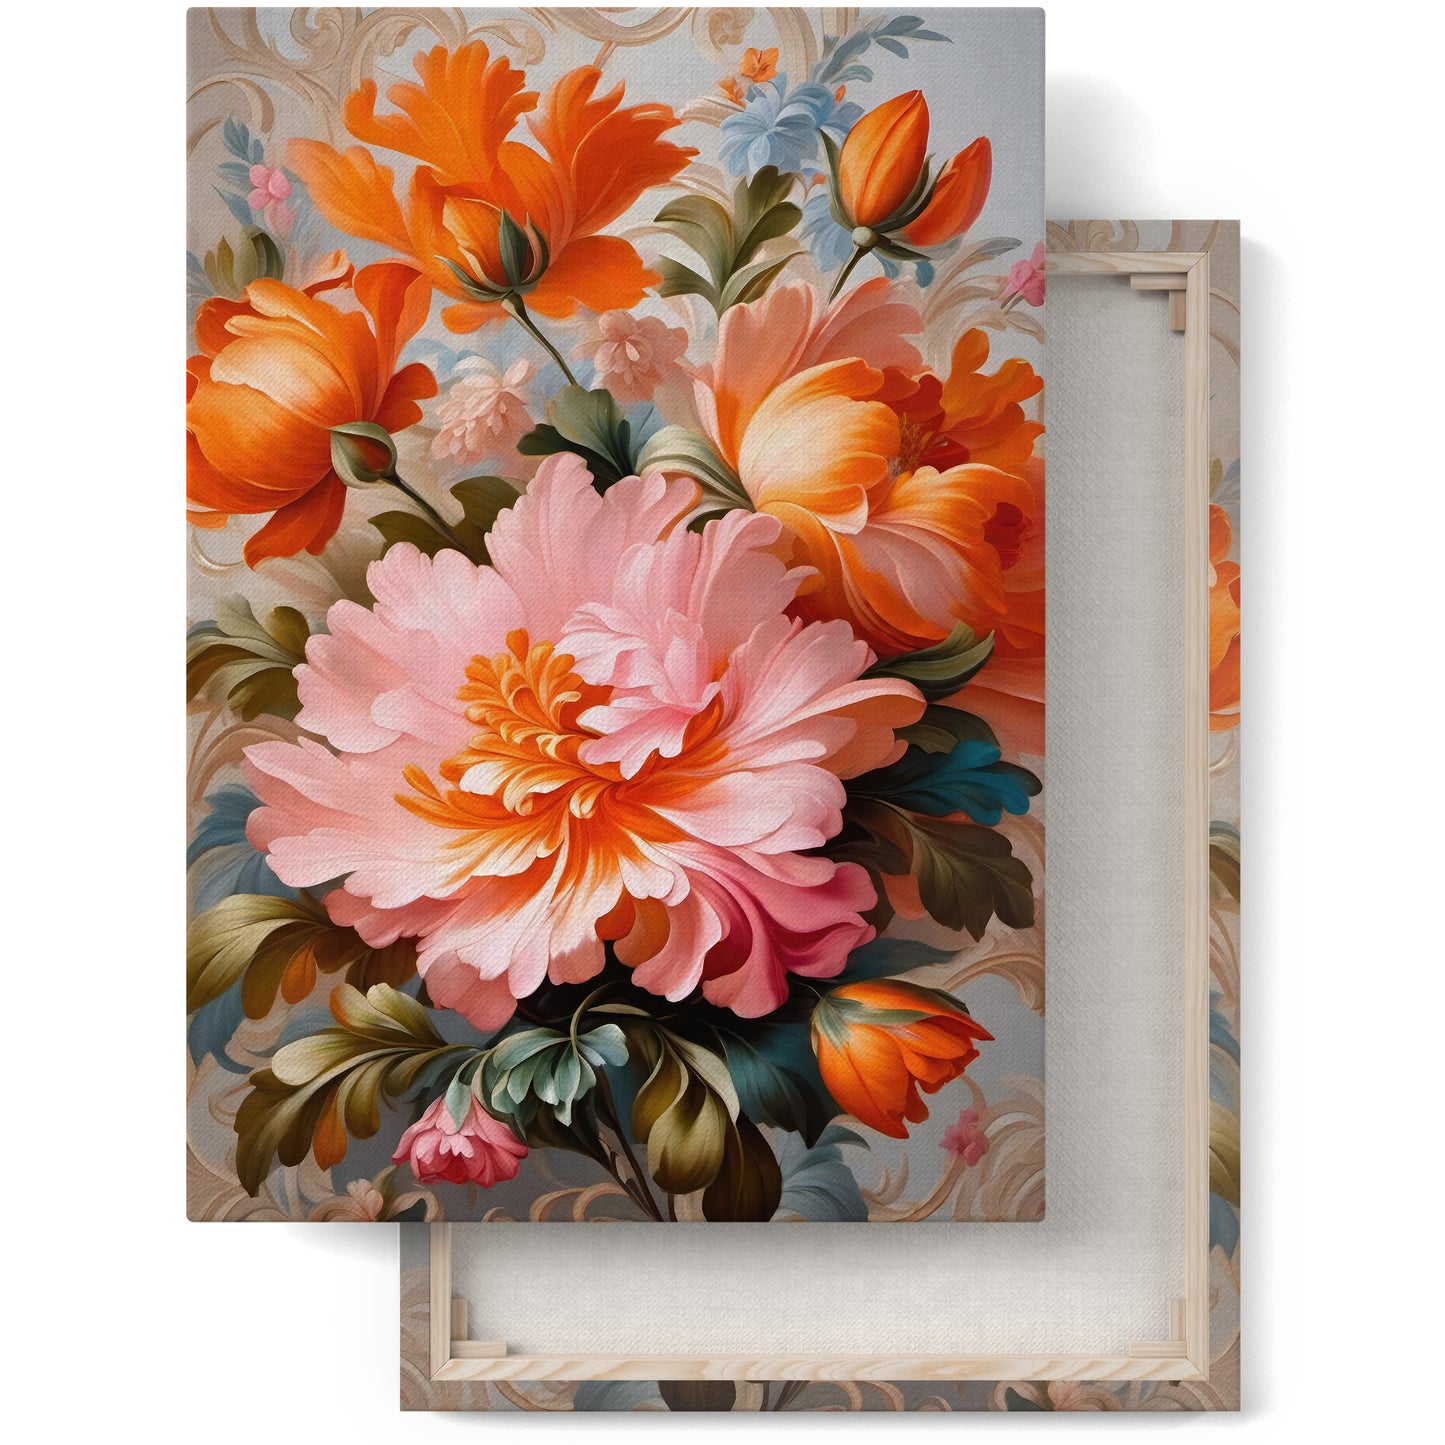 Blooming Beauty: Floral Canvas Art Print